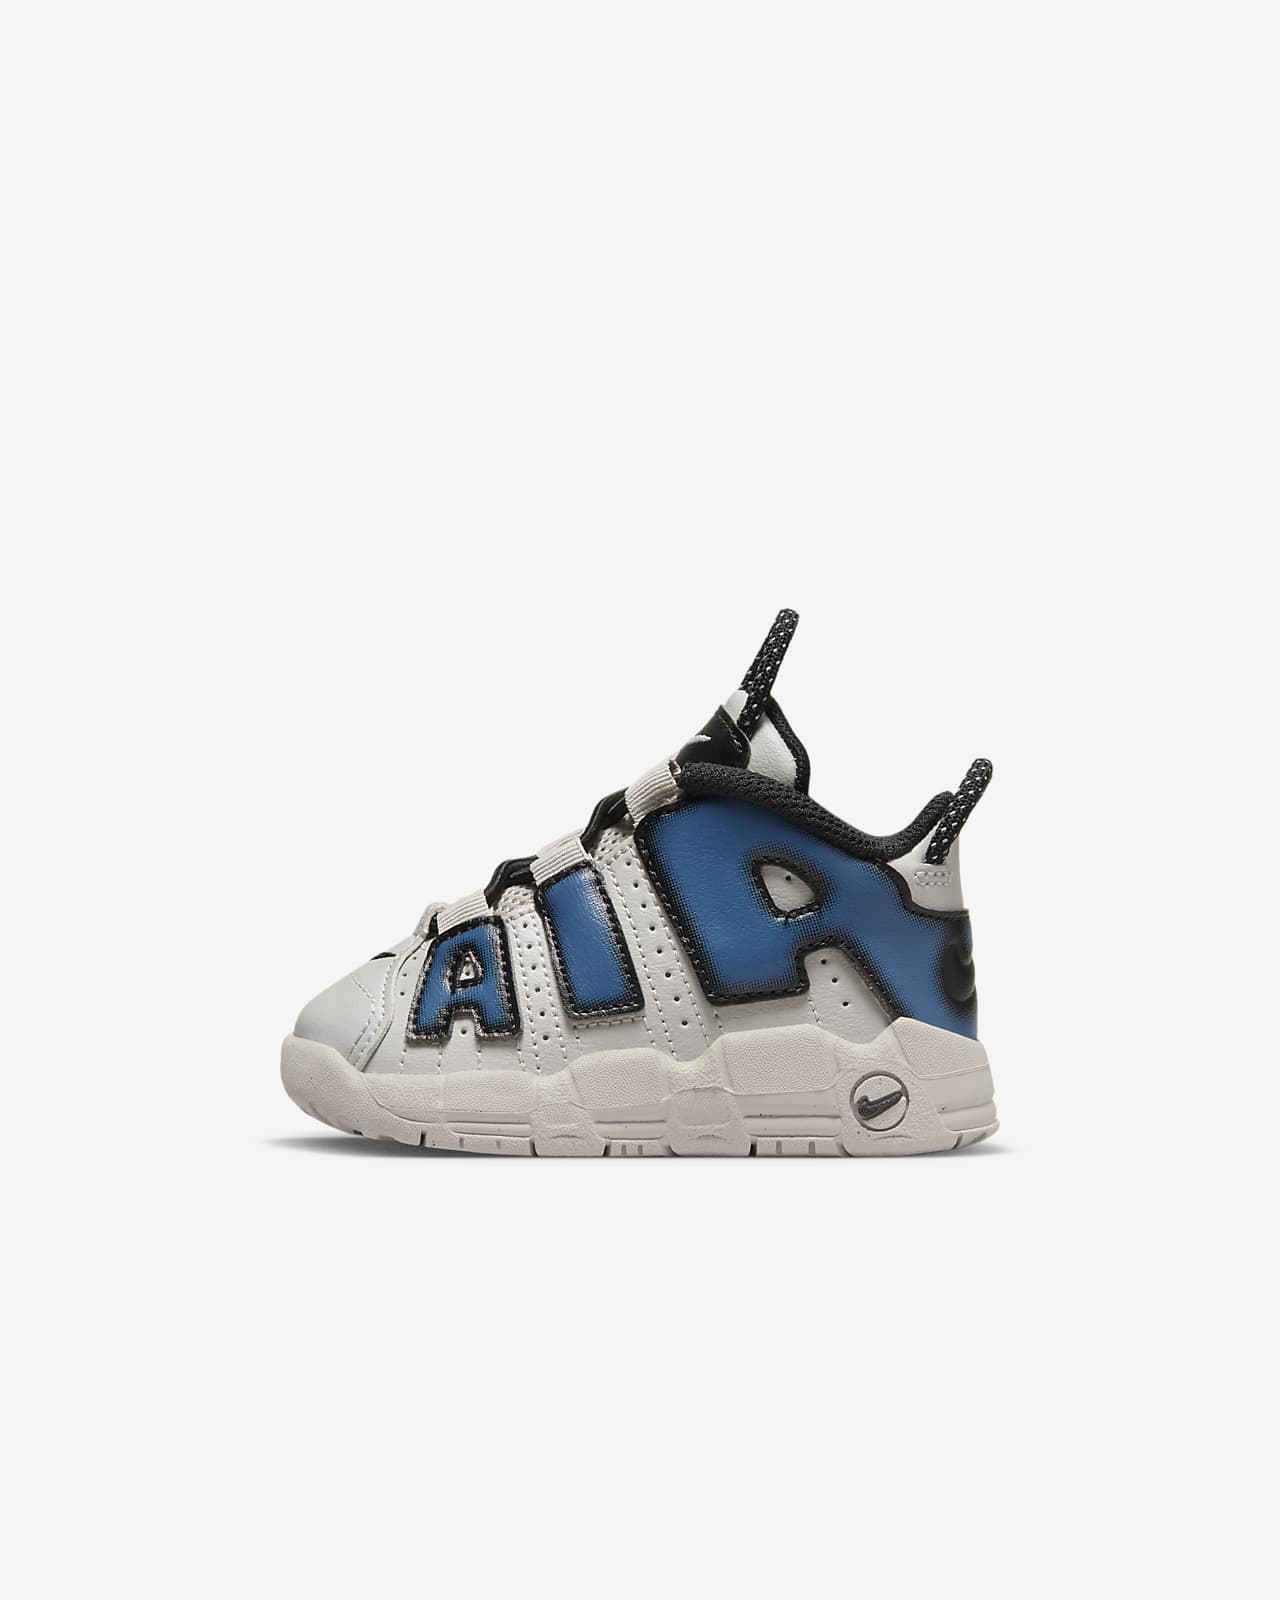 Nike Air More Uptempo SE Women's Shoes.